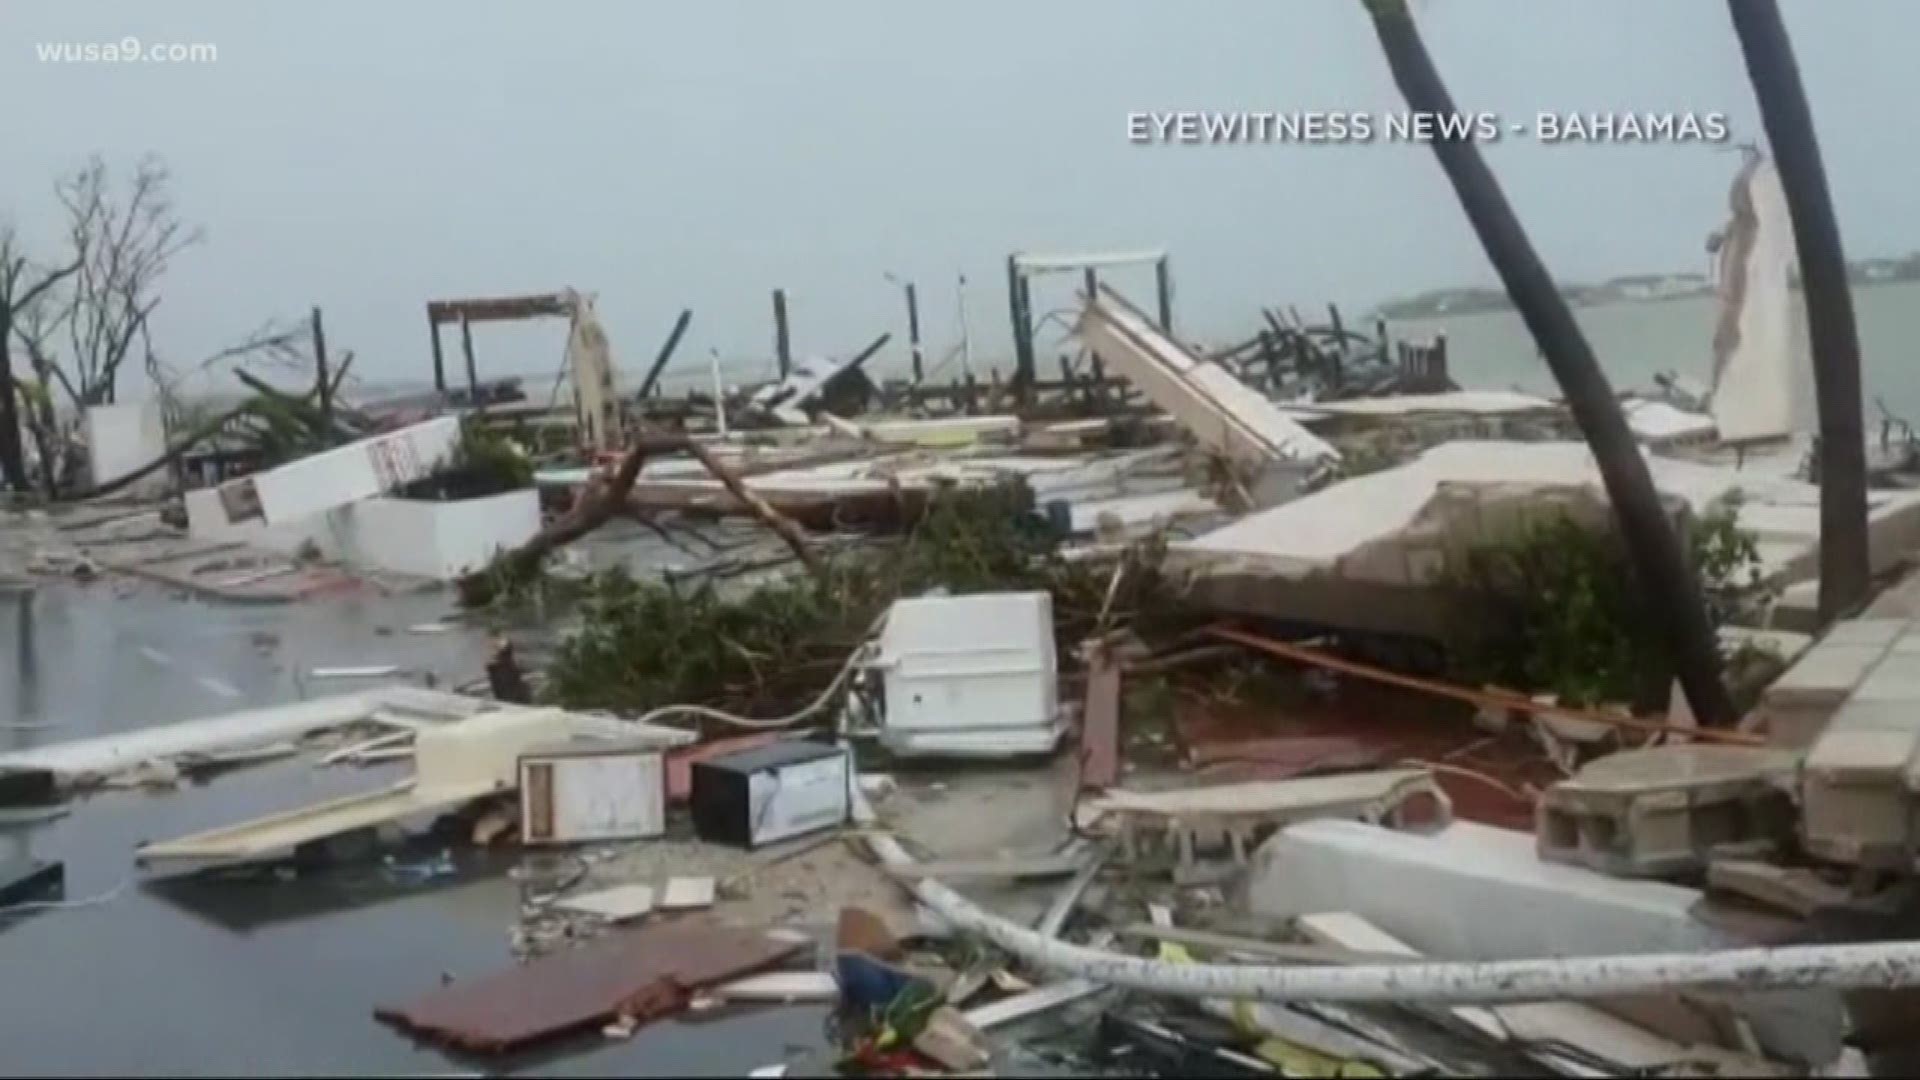 We're starting to get a look at the destruction left behind and the support -- both physically and emotionally -- that the Bahamas will need to rebuild. 
Our Kolbie Satterfield talked with officials in the Bahamas embassy and tells us how some are already pitching in and how you can too.